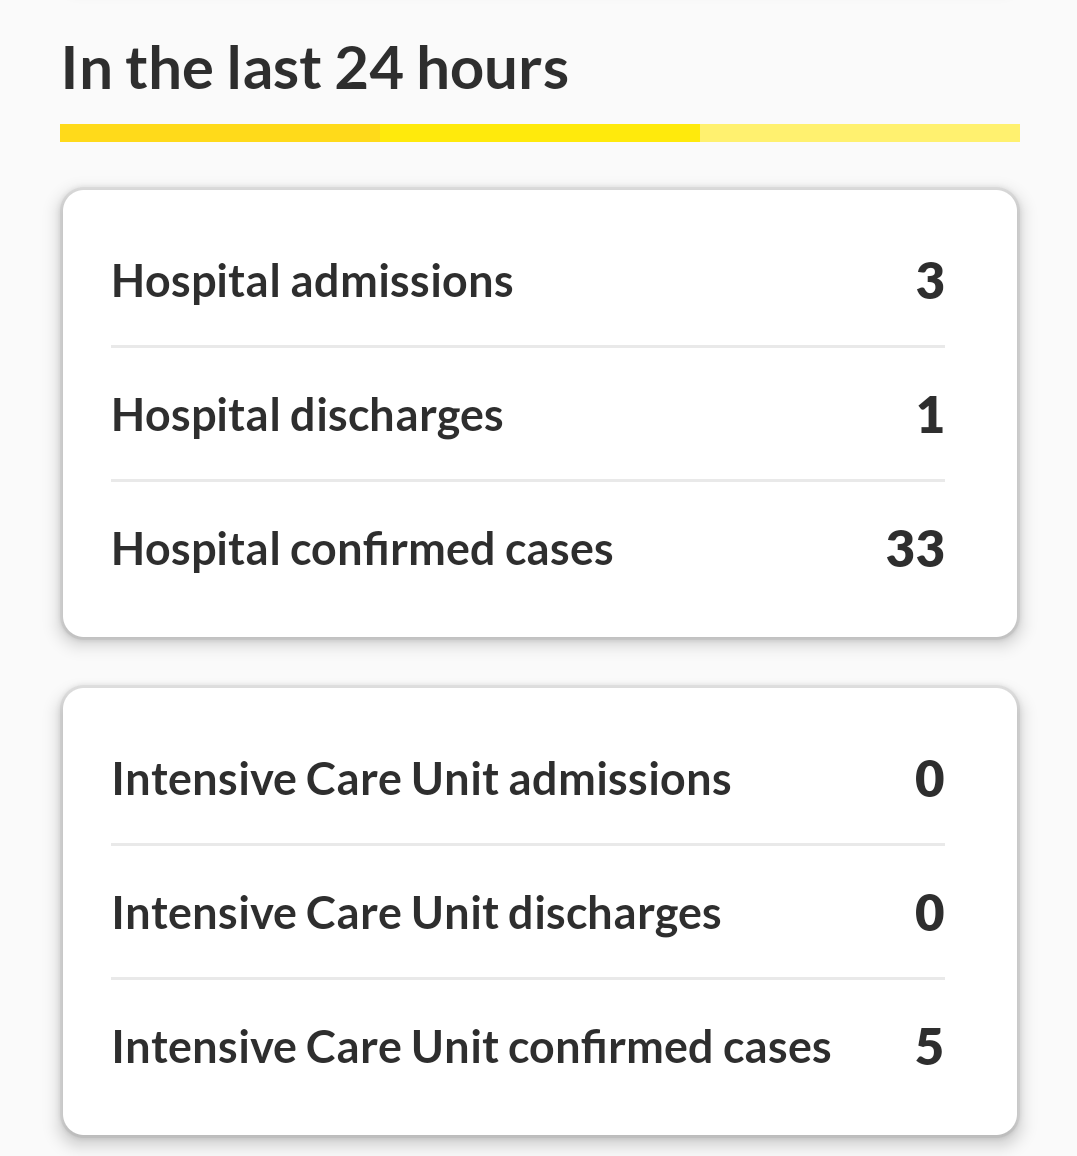 I'm glad to see the  @HSELive COVID19 app now shows hospitalisation stats on its updates screen, as these are important to monitor if we want to see if the situation is getting worse independent of testing.